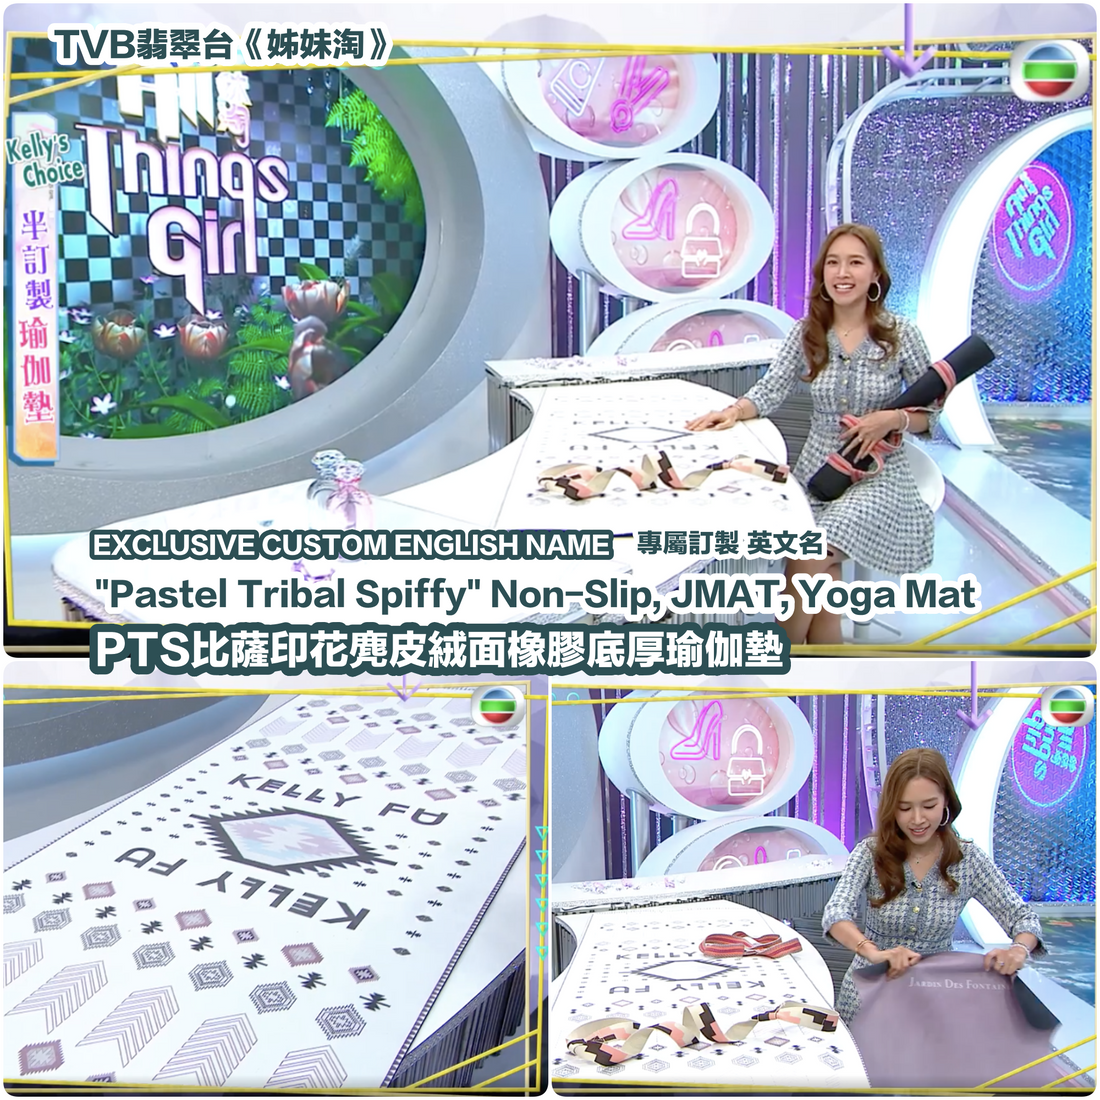 "Exclusive Customized English Name" JMAT Yoga Mat Strongly Launched on TVB Jade Channel “All Things Girl”